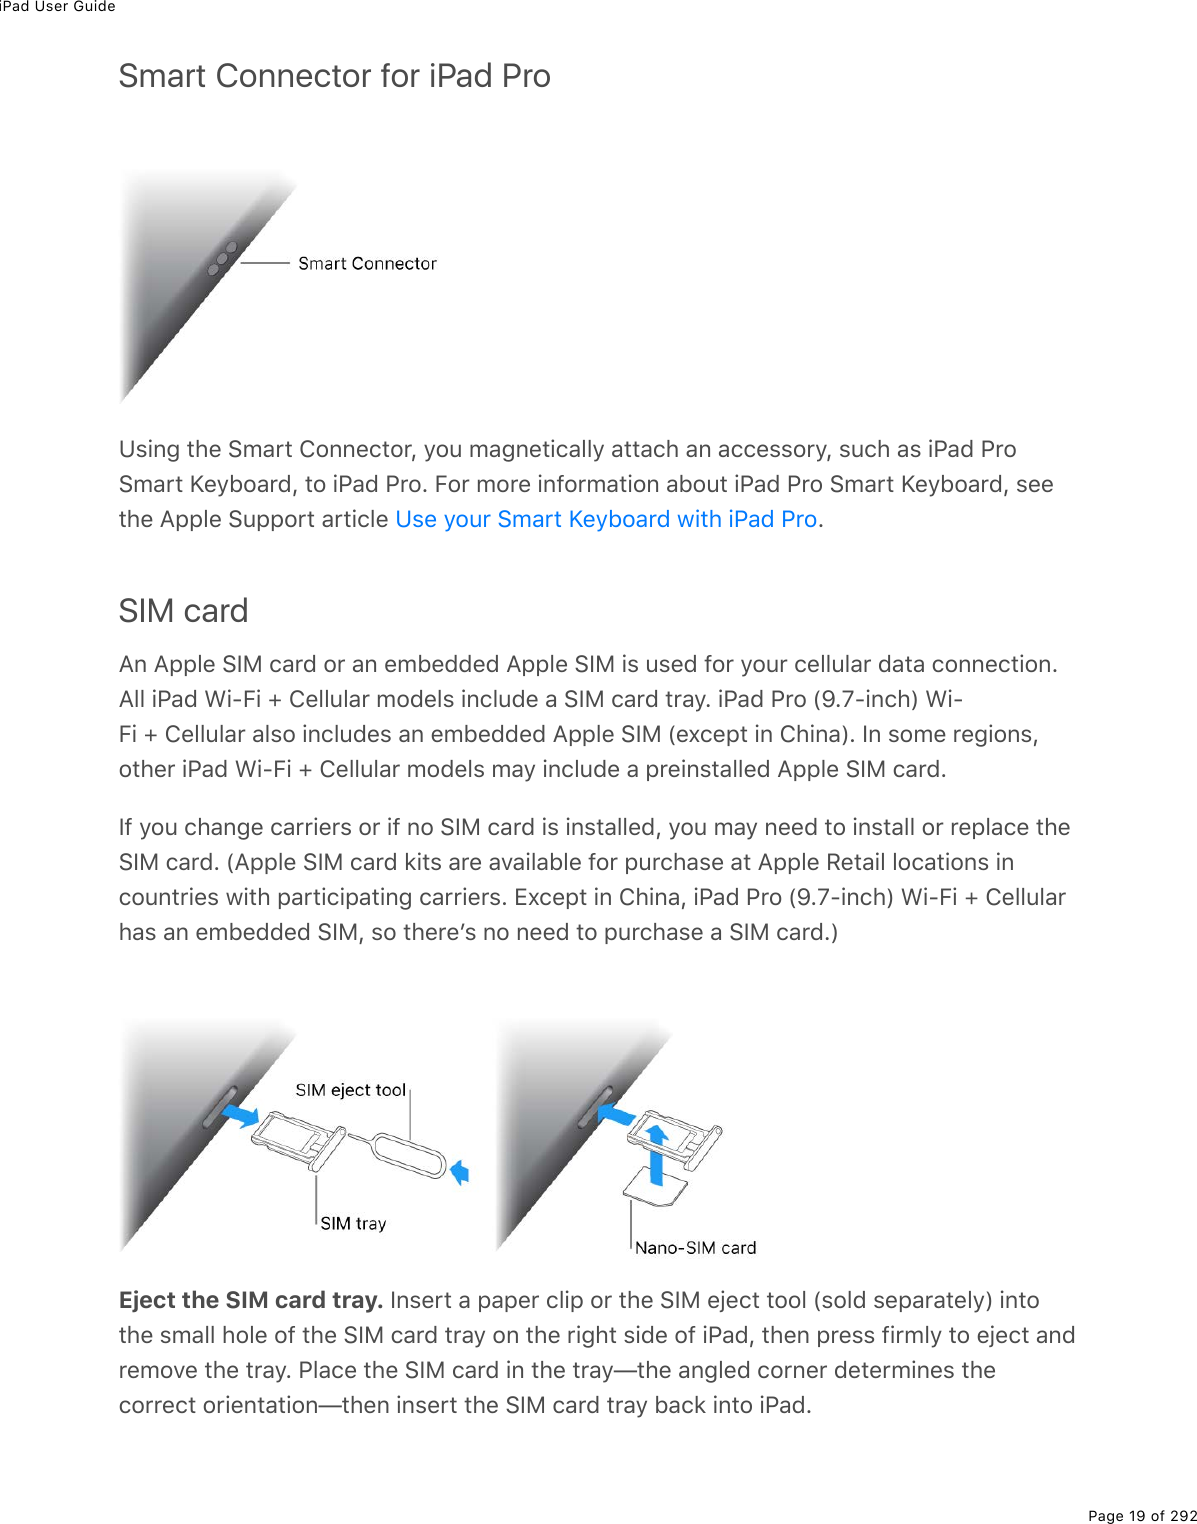 iPad User GuidePage 19 of 292Smart Connector for iPad ProUsing the Smart Connector, you magnetically attach an accessory, such as iPad ProSmart Keyboard, to iPad Pro. For more information about iPad Pro Smart Keyboard, seethe Apple Support article  .SIM cardAn Apple SIM card or an embedded Apple SIM is used for your cellular data connection.All iPad Wi-Fi + Cellular models include a SIM card tray. iPad Pro (9.7-inch) Wi-Fi + Cellular also includes an embedded Apple SIM (except in China). In some regions,other iPad Wi-Fi + Cellular models may include a preinstalled Apple SIM card.If you change carriers or if no SIM card is installed, you may need to install or replace theSIM card. (Apple SIM card kits are available for purchase at Apple Retail locations incountries with participating carriers. Except in China, iPad Pro (9.7-inch) Wi-Fi + Cellularhas an embedded SIM, so thereʼs no need to purchase a SIM card.)Eject the SIM card tray. Insert a paper clip or the SIM eject tool (sold separately) intothe small hole of the SIM card tray on the right side of iPad, then press firmly to eject andremove the tray. Place the SIM card in the tray—the angled corner determines thecorrect orientation—then insert the SIM card tray back into iPad.Use your Smart Keyboard with iPad Pro